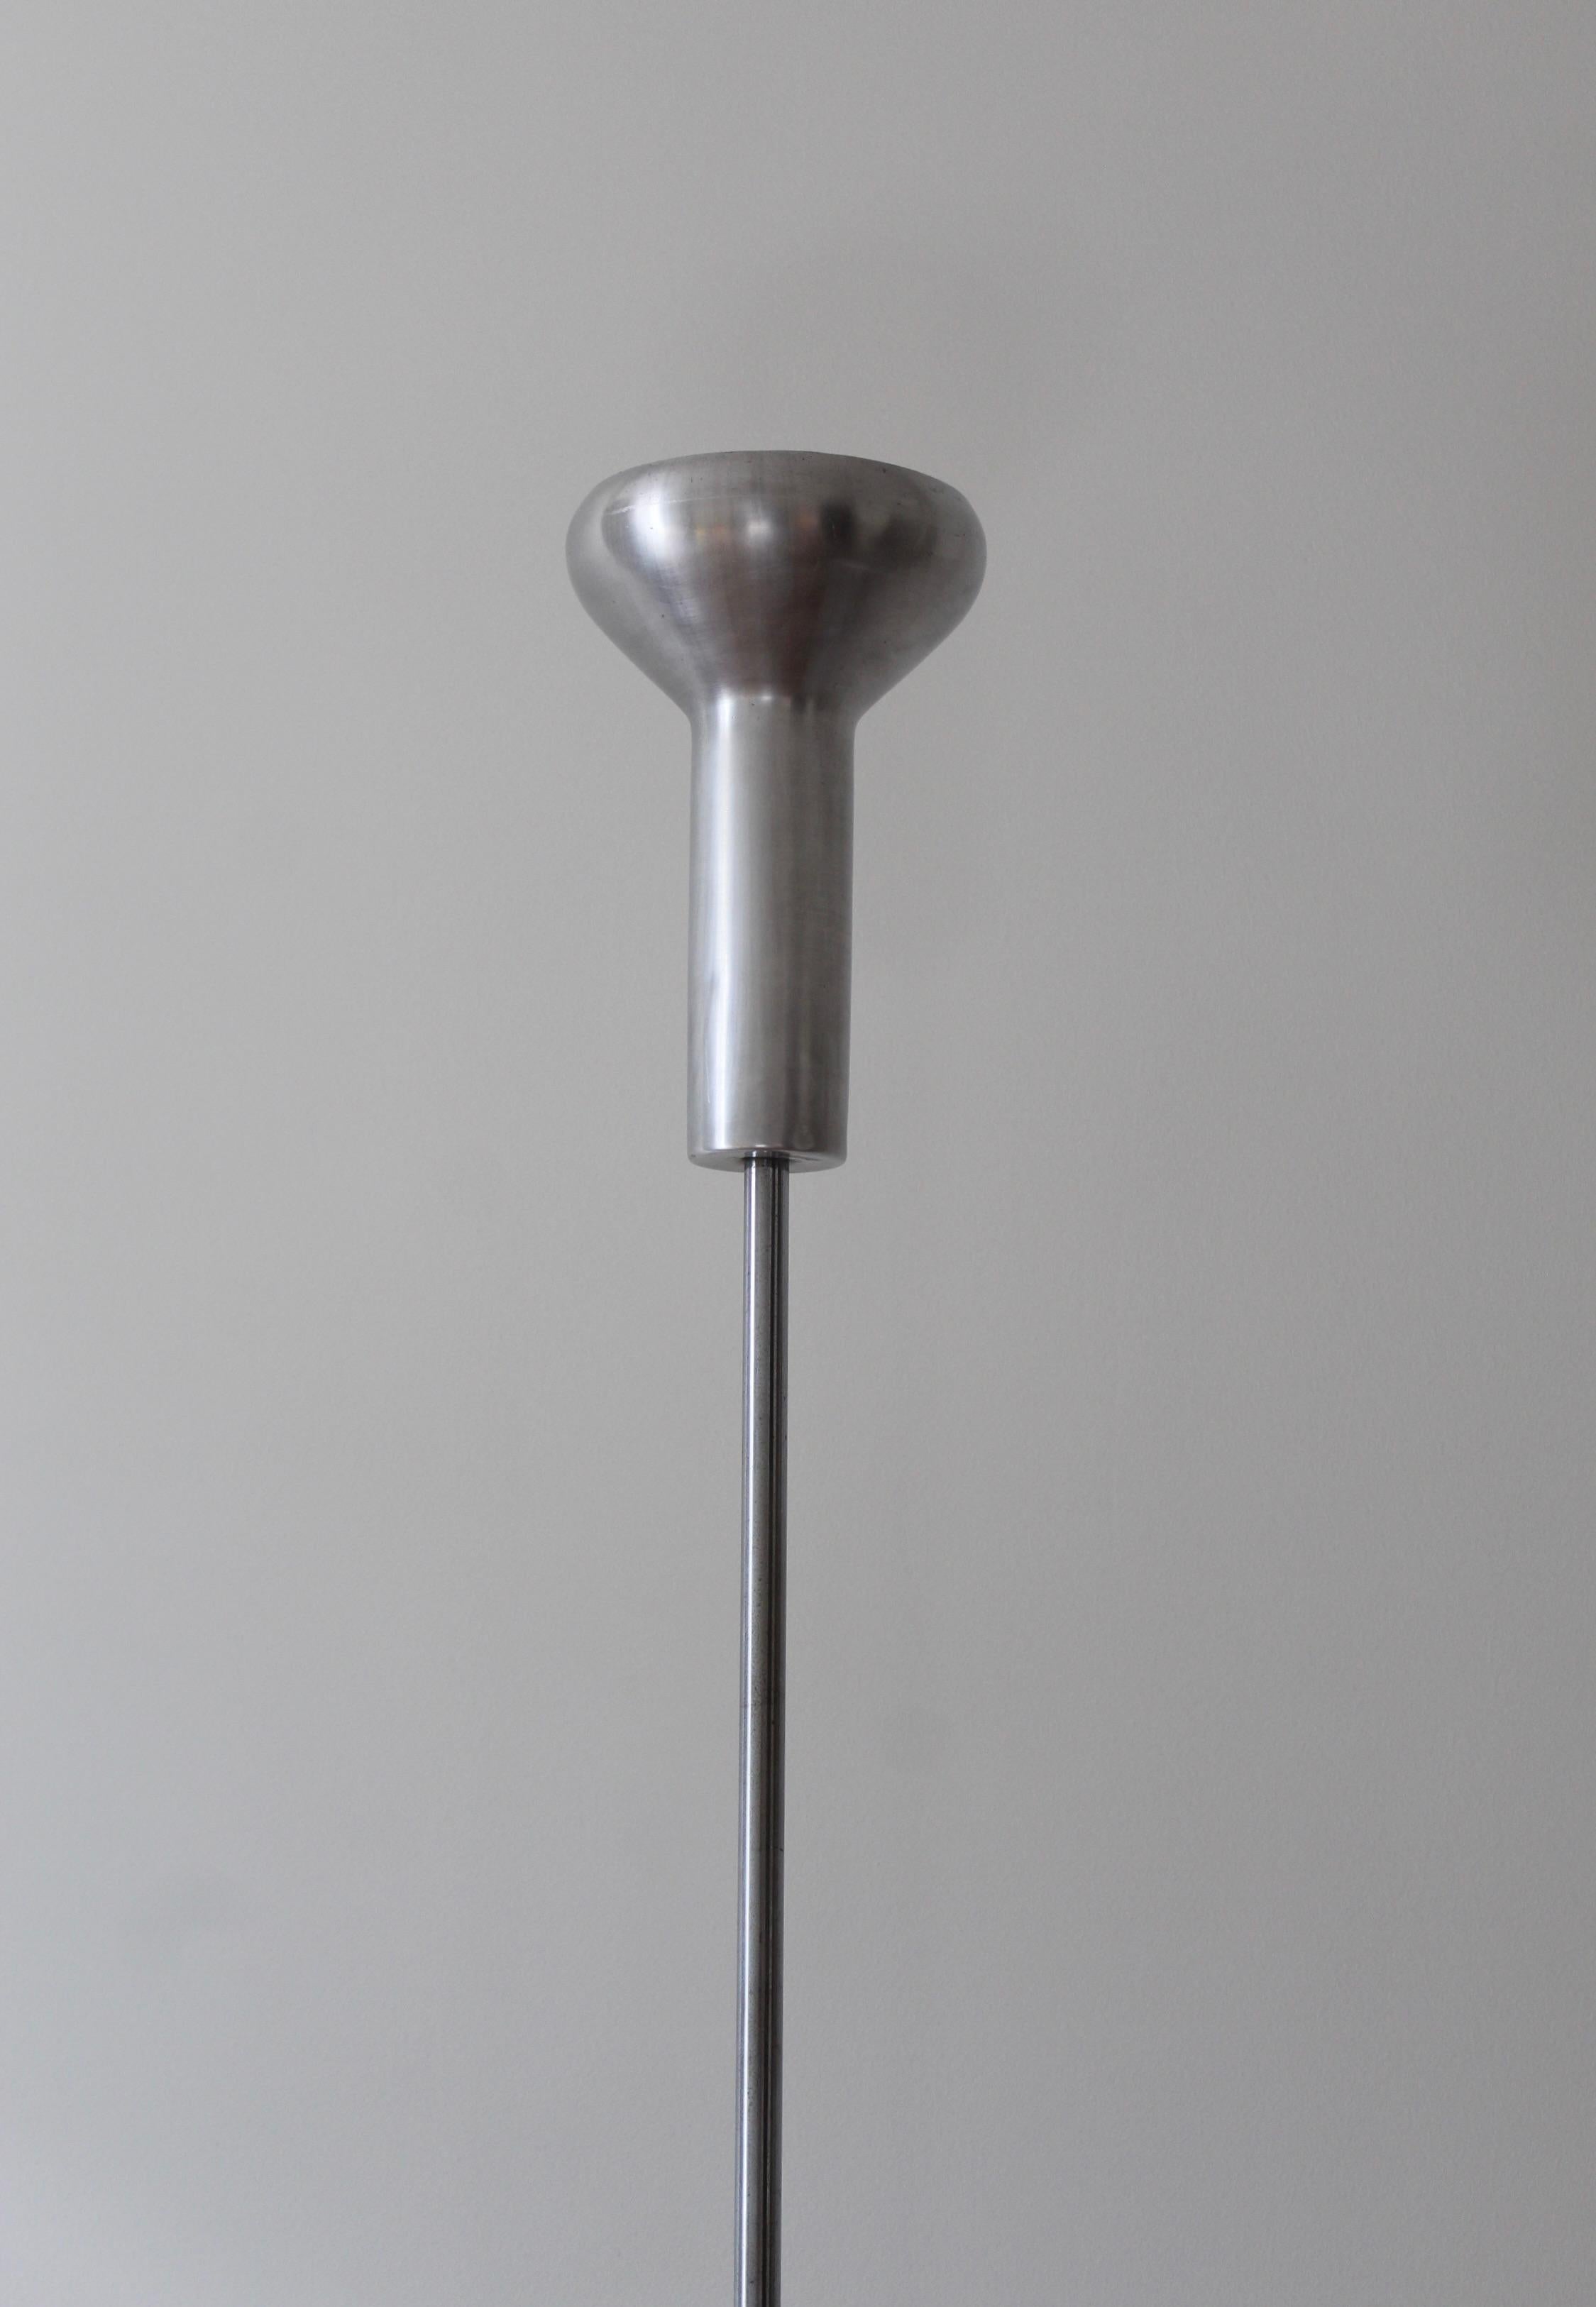 Gino Sarfatti, Floor Lamp, Aluminum, Chrome Metal, Arteluce, Italy, 1950s In Good Condition For Sale In High Point, NC